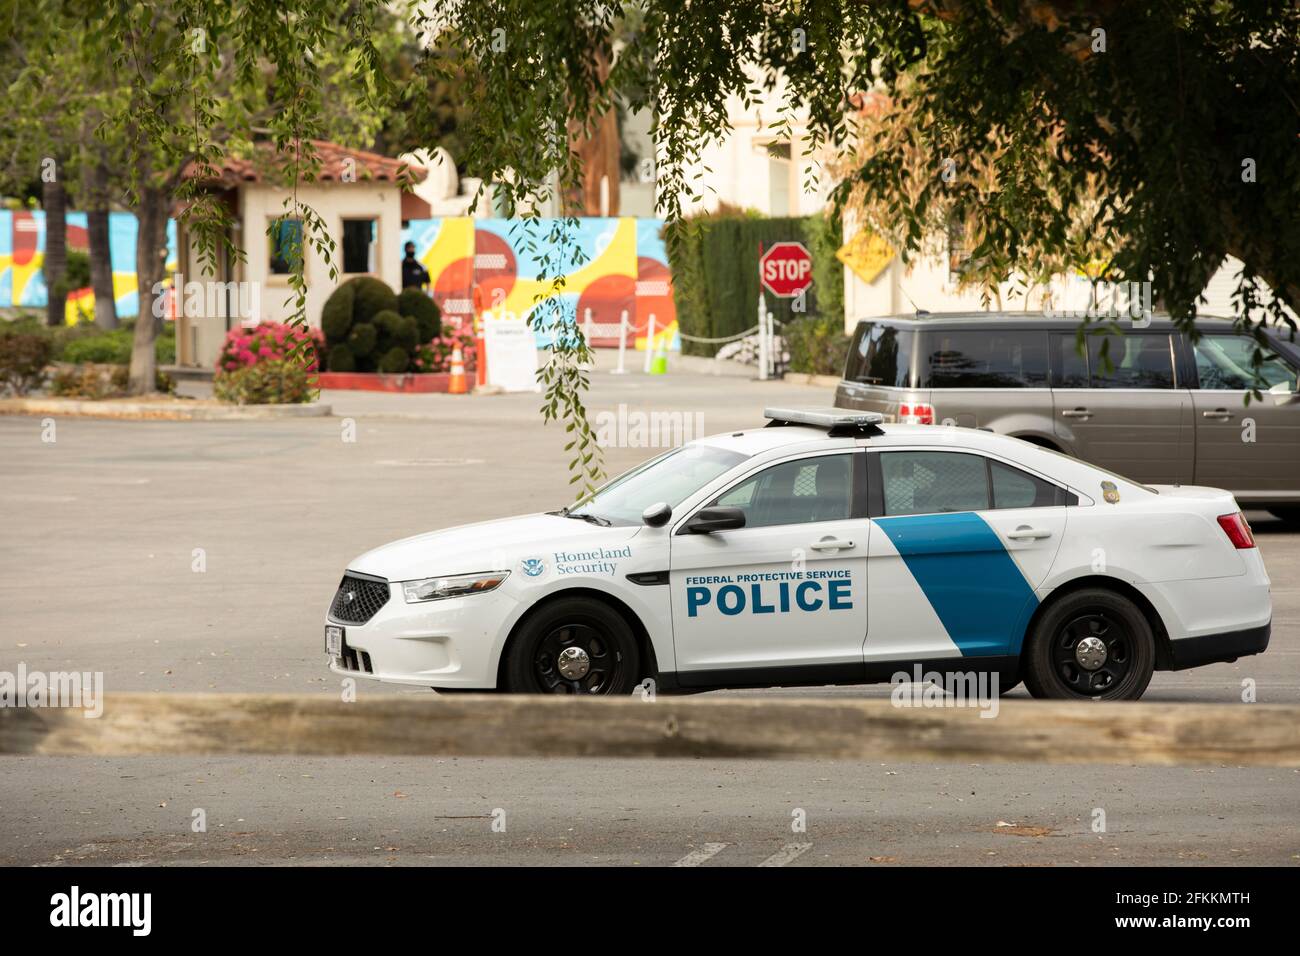 Pomona, California, USA - May 1, 2020: A department of Homeland Security squad car parks outside the Pomona Fairplex, which is receiving an influx of Stock Photo